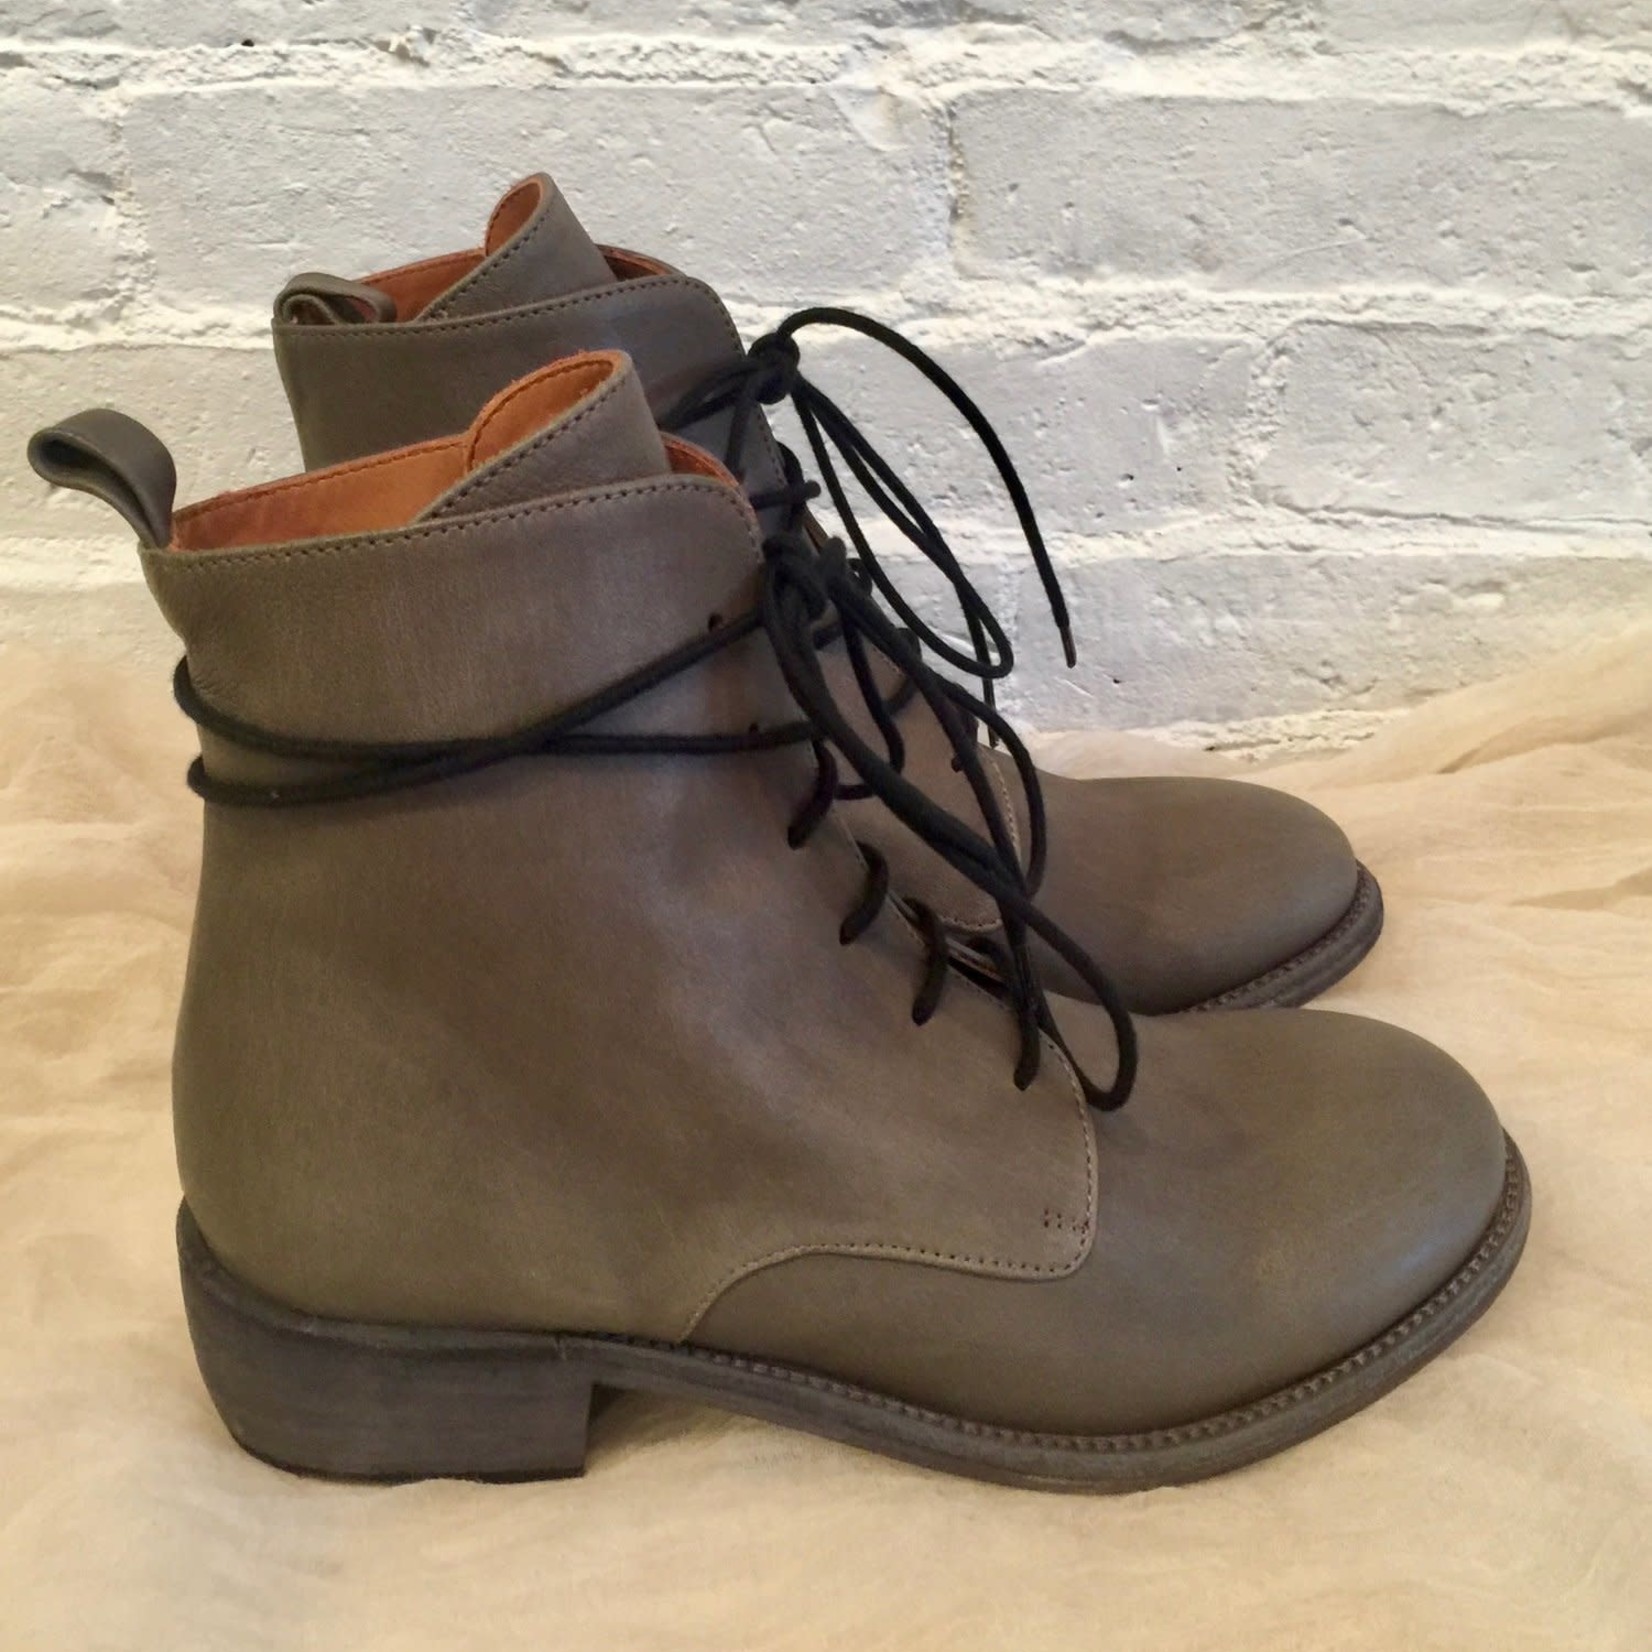 P. Monjo Honora Boot